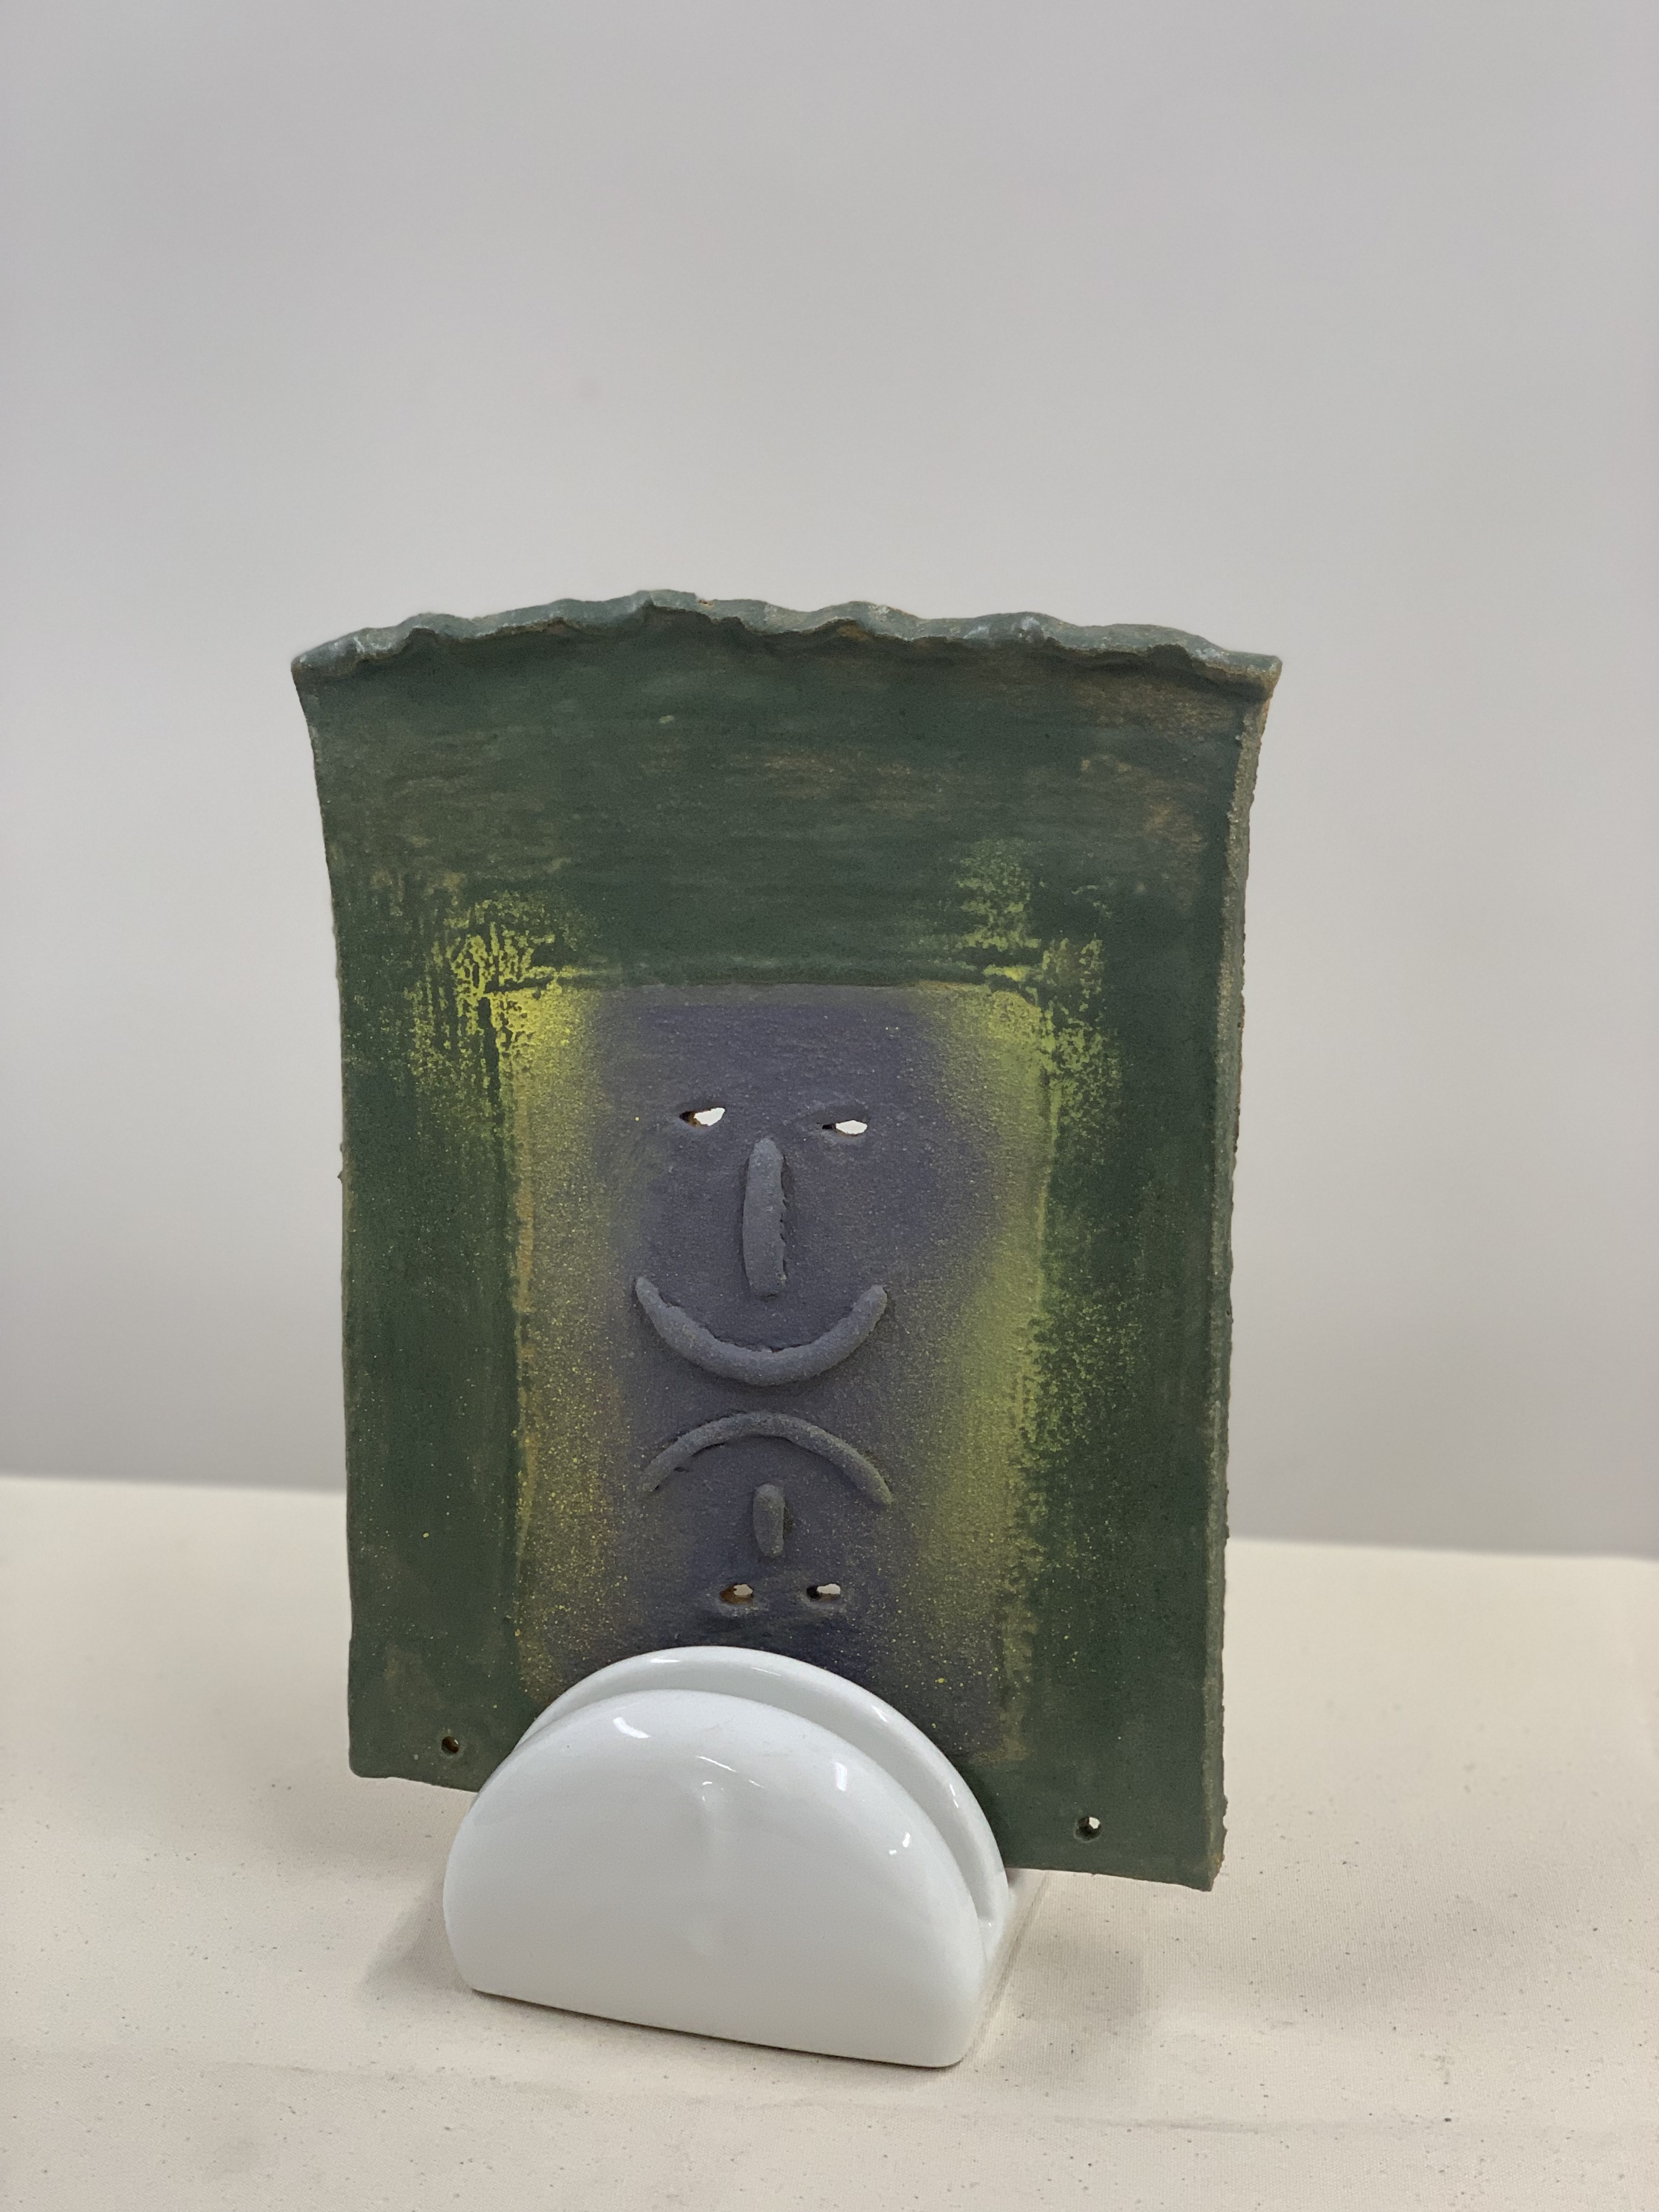 Sculpture by Rachel Walters in glazed stoneware placed with found ceramic titled Bert and Ernie